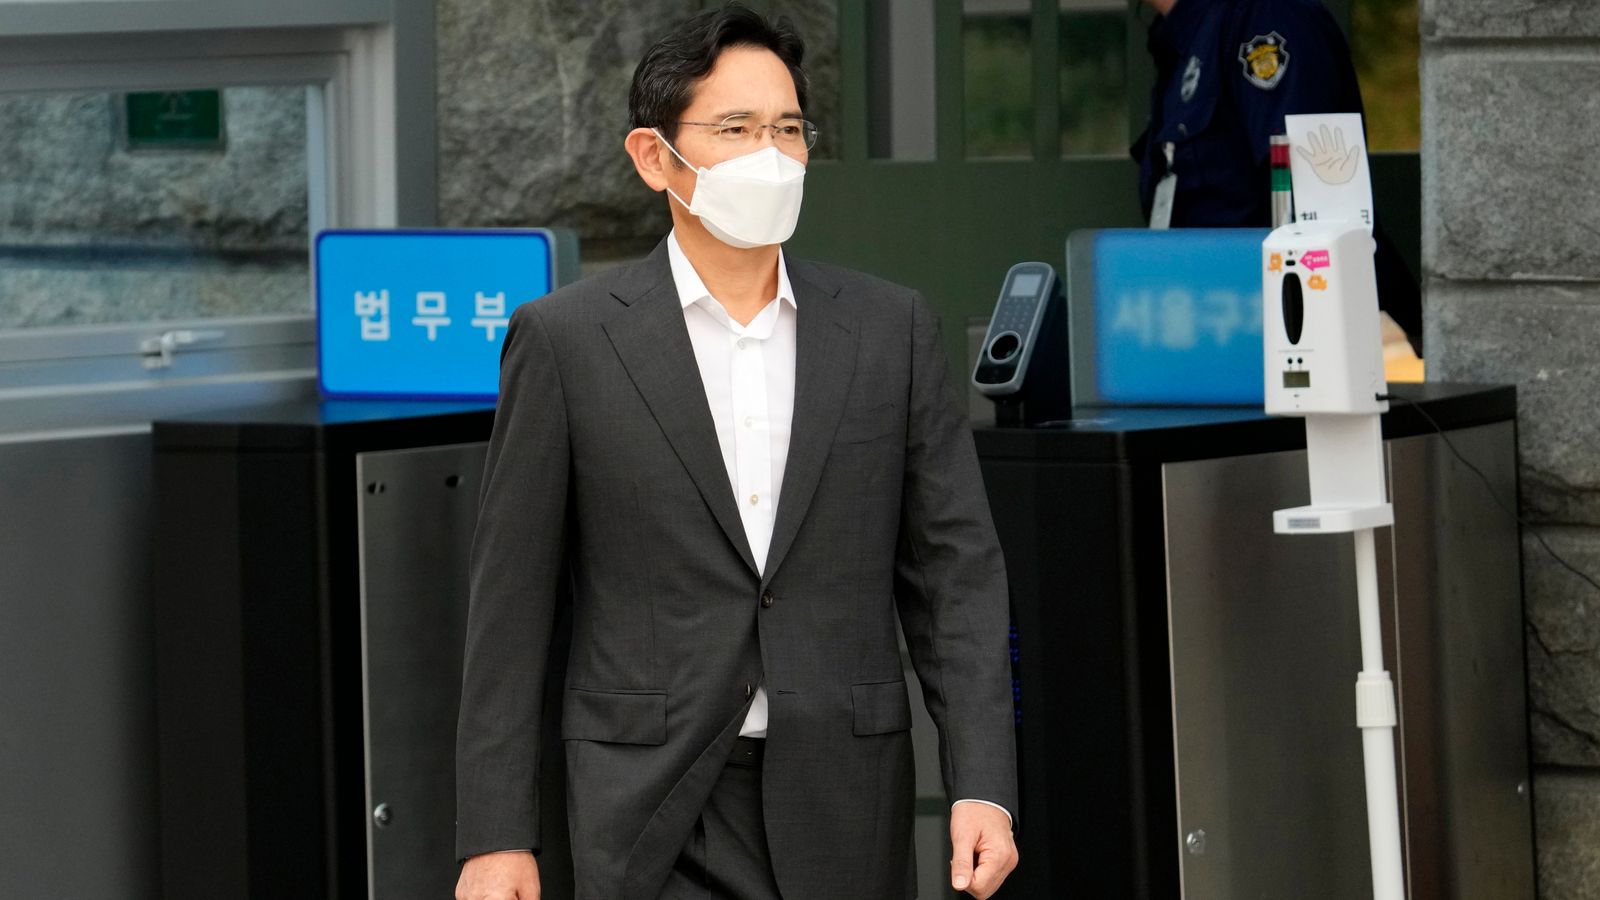 Samsung boss Lee Jae-yong released from jail on parole 'in national interest'